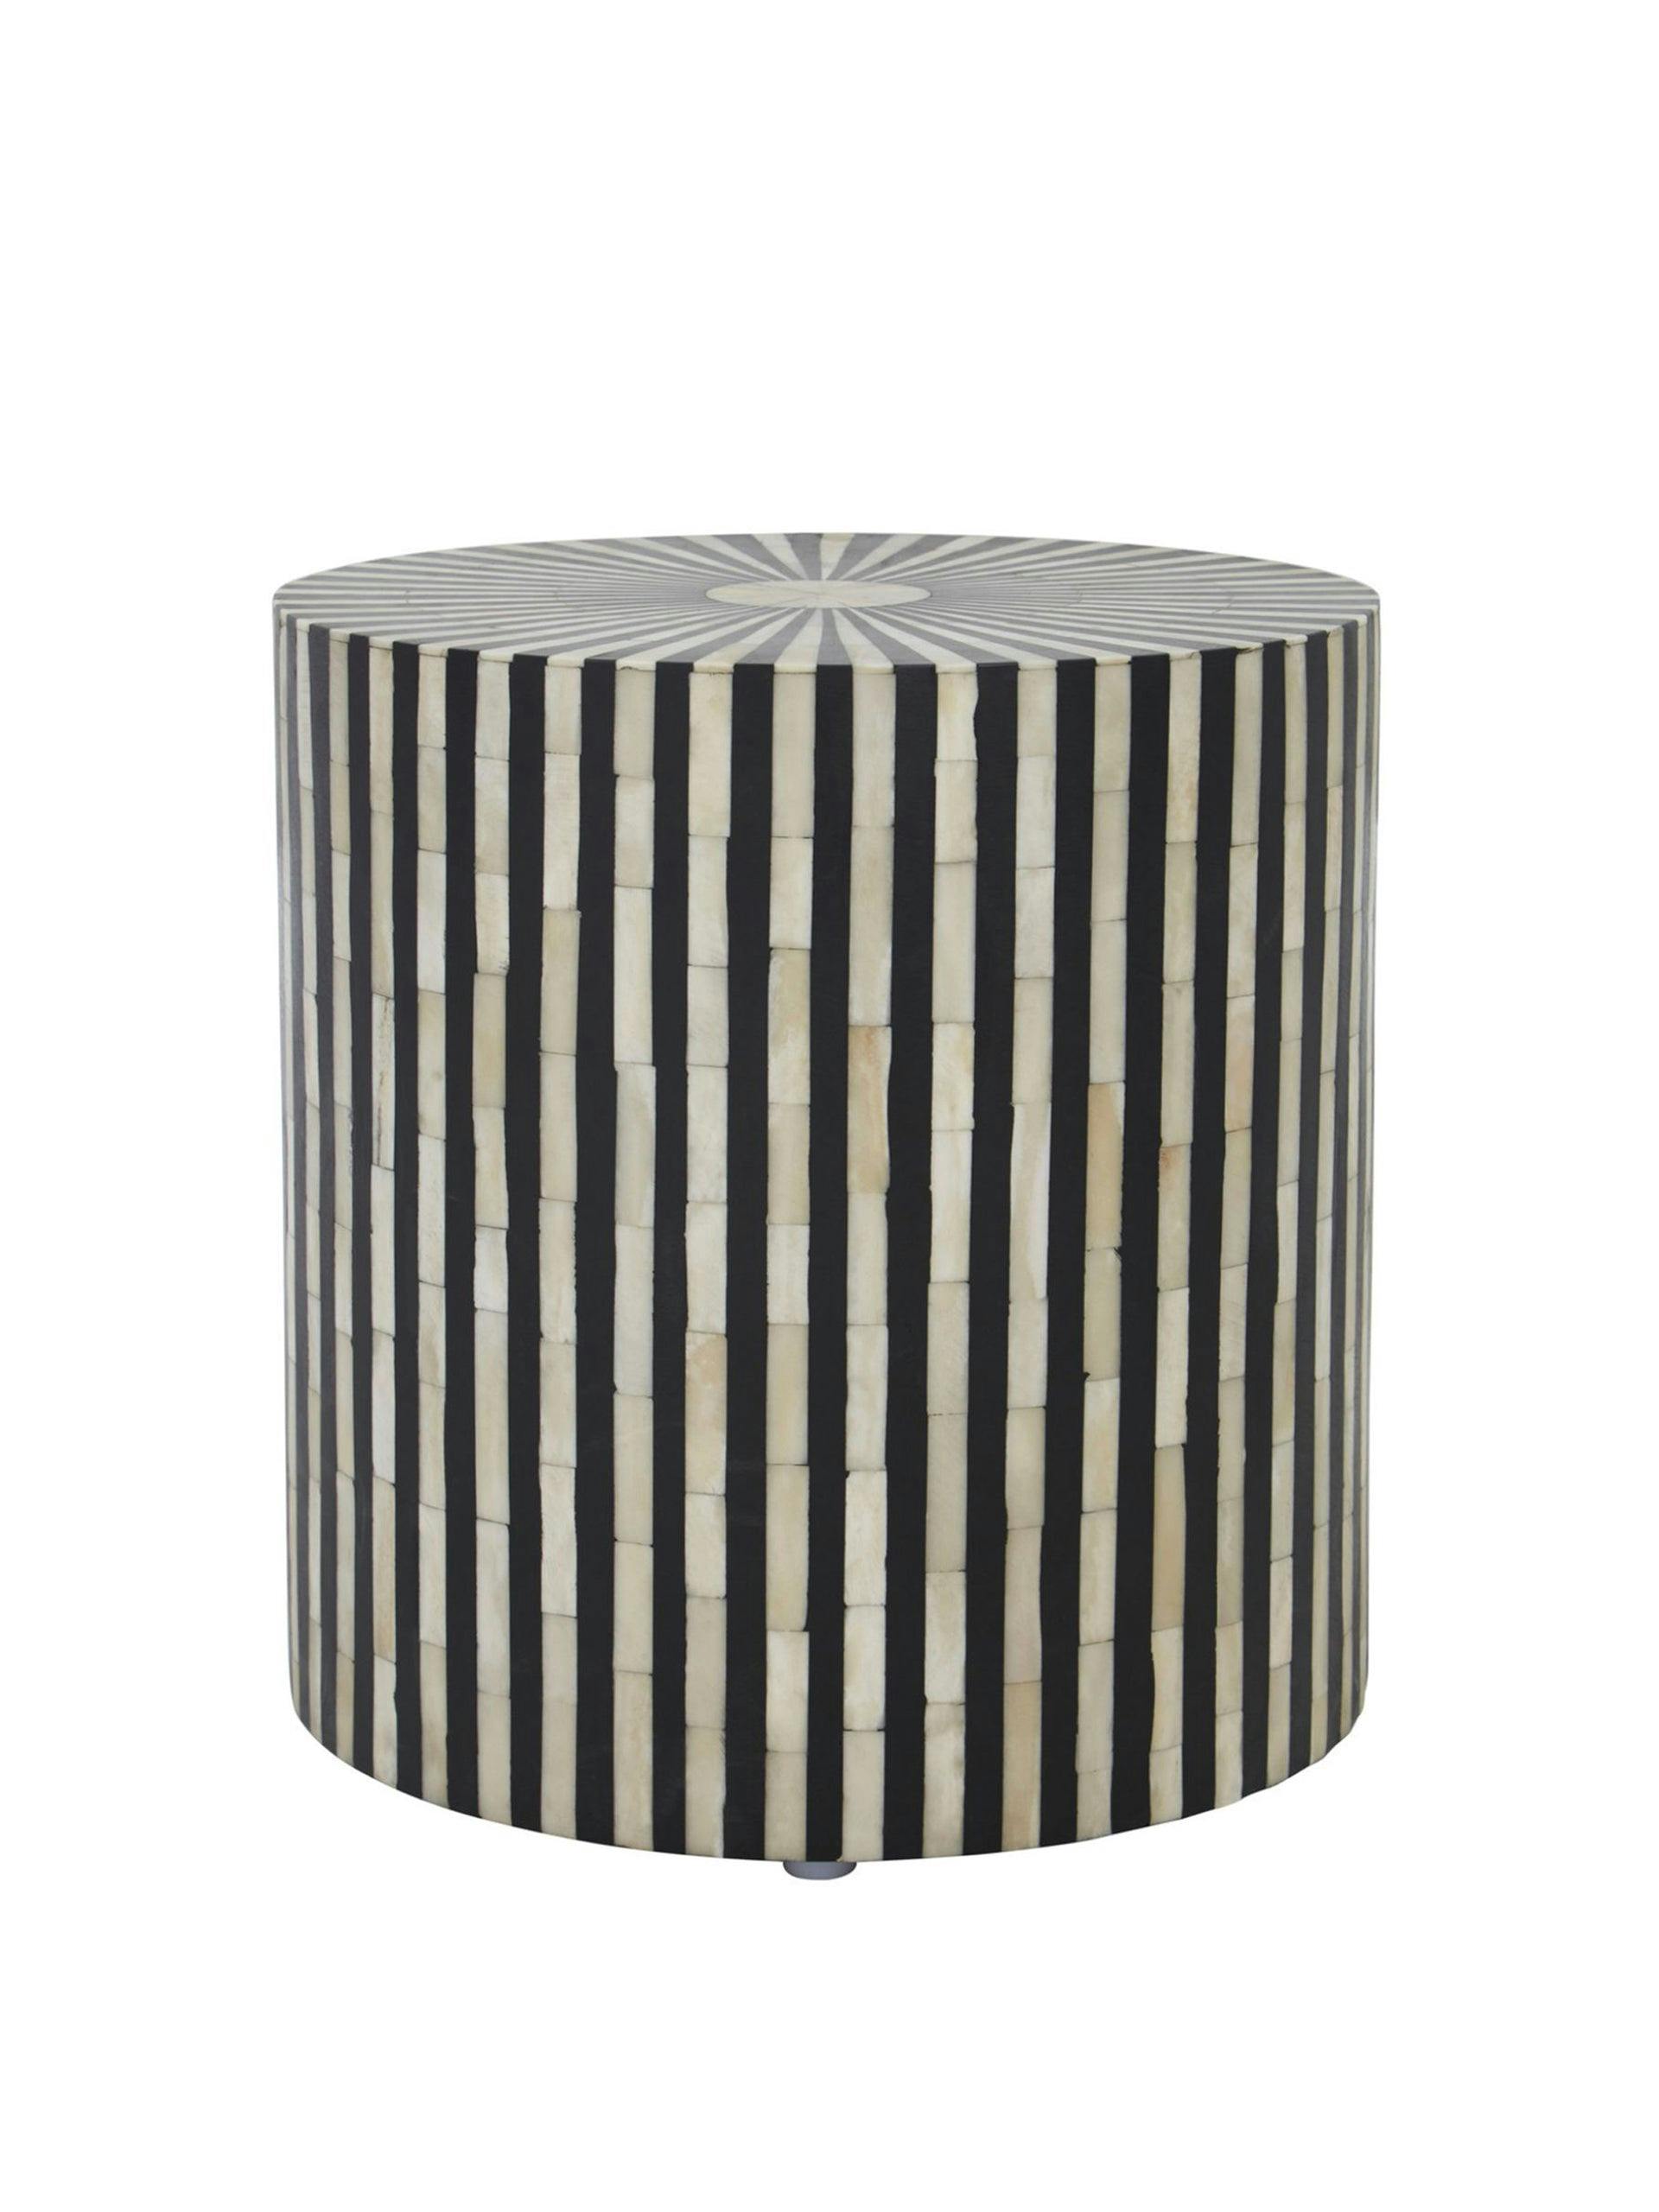 Black and white striped side table